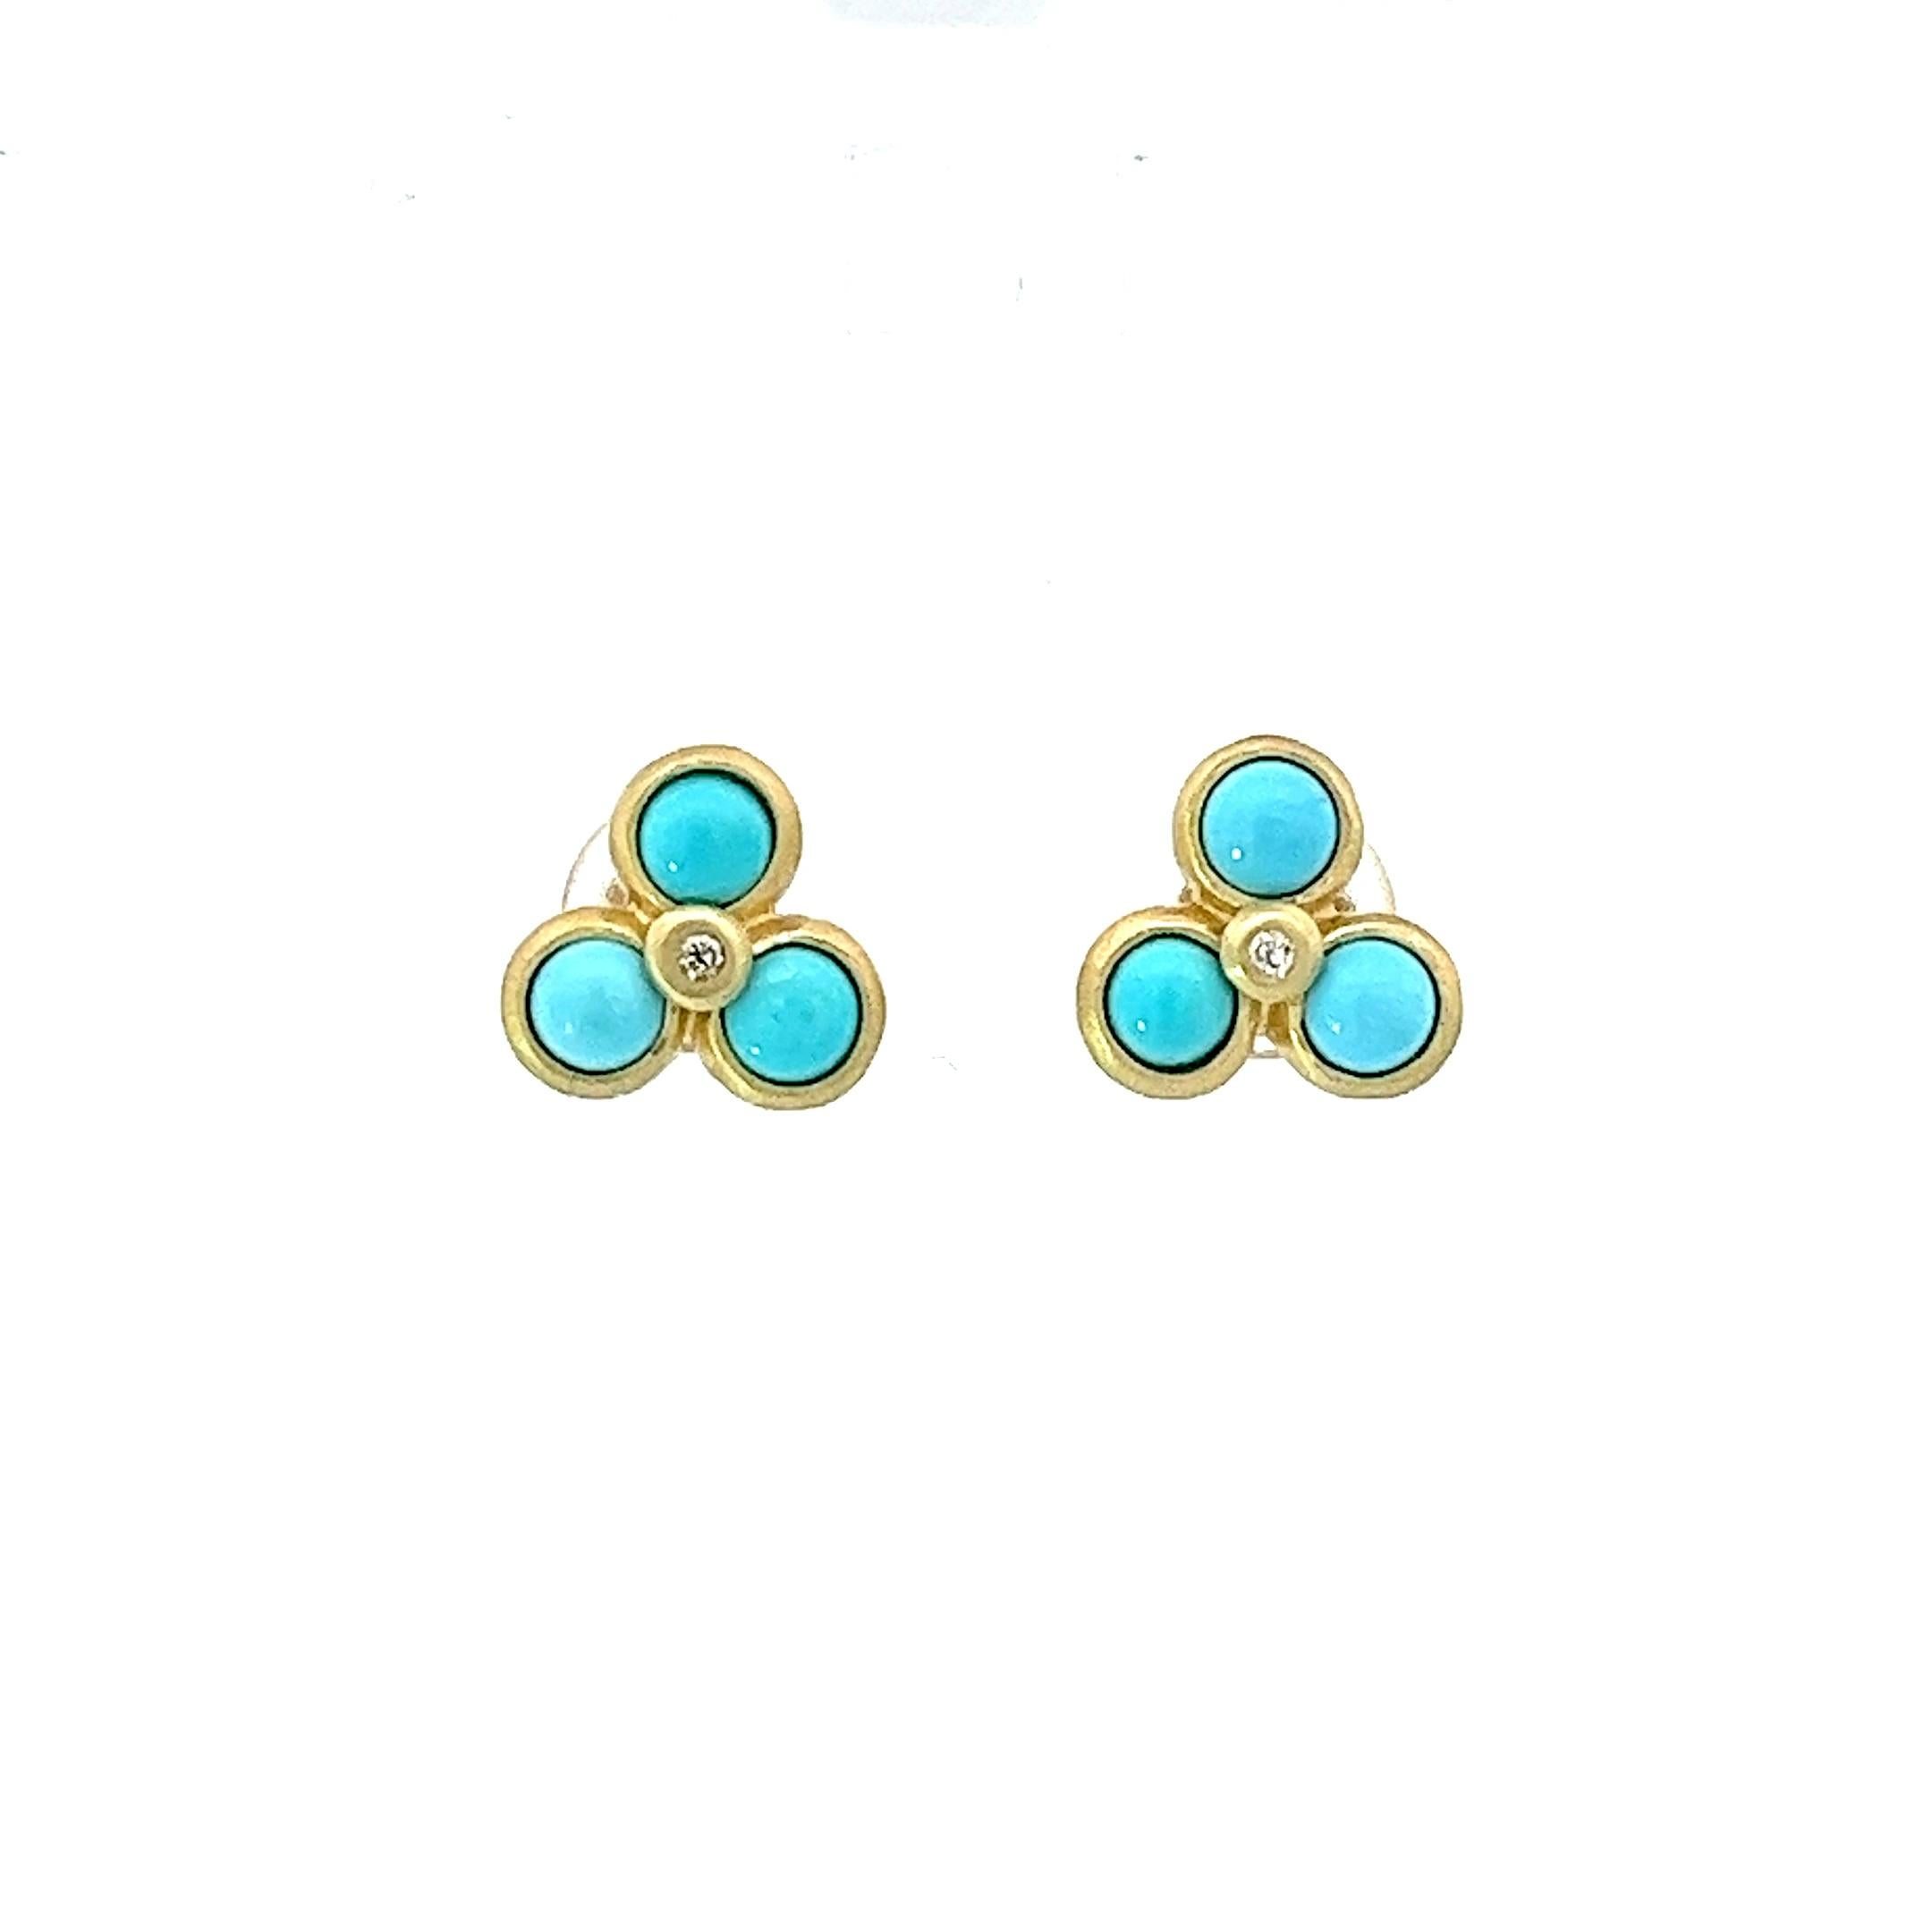 Faye Kim's 18 Karat Gold Triple Turquoise and Diamond Stud Earrings feature three bezel set brightly hued turquoise stones and one round center diamond per stud. Providing the perfect amount of color 